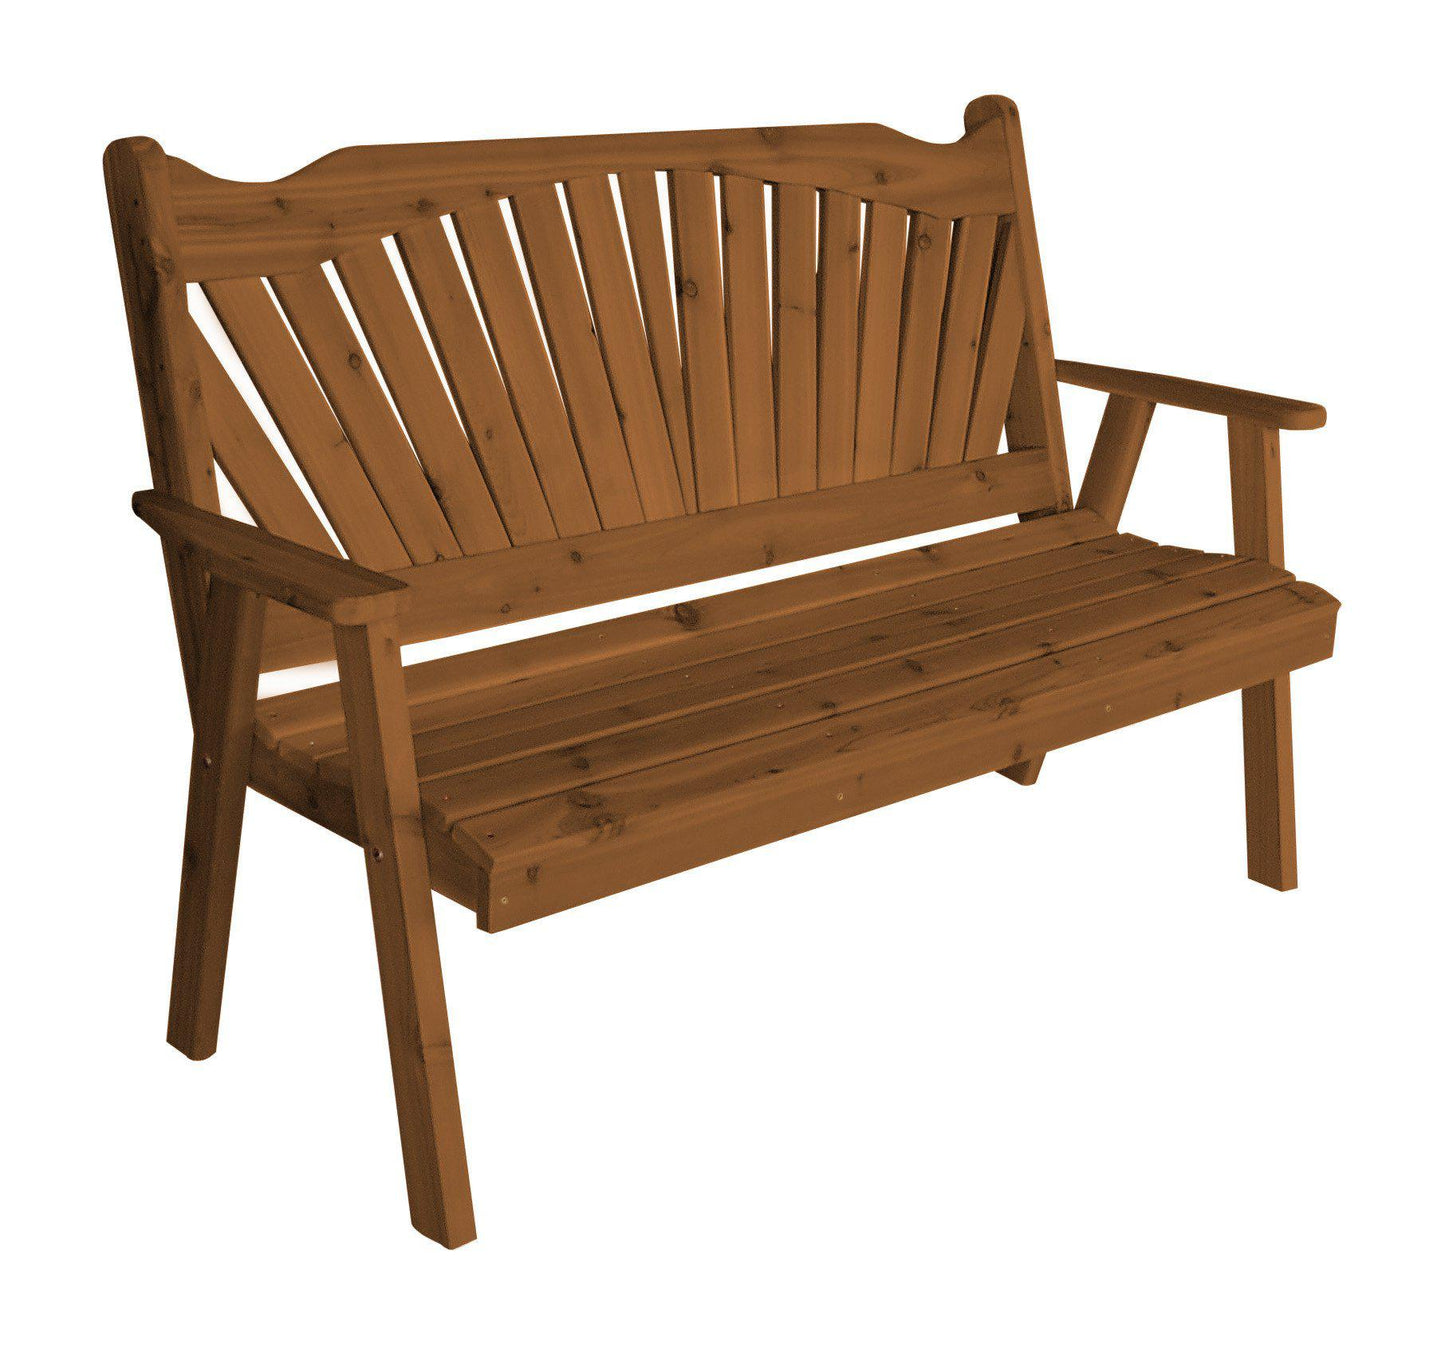 A&L Furniture Co. Western Red Cedar 6' Fanback Garden Bench - LEAD TIME TO SHIP 4 WEEKS OR LESS